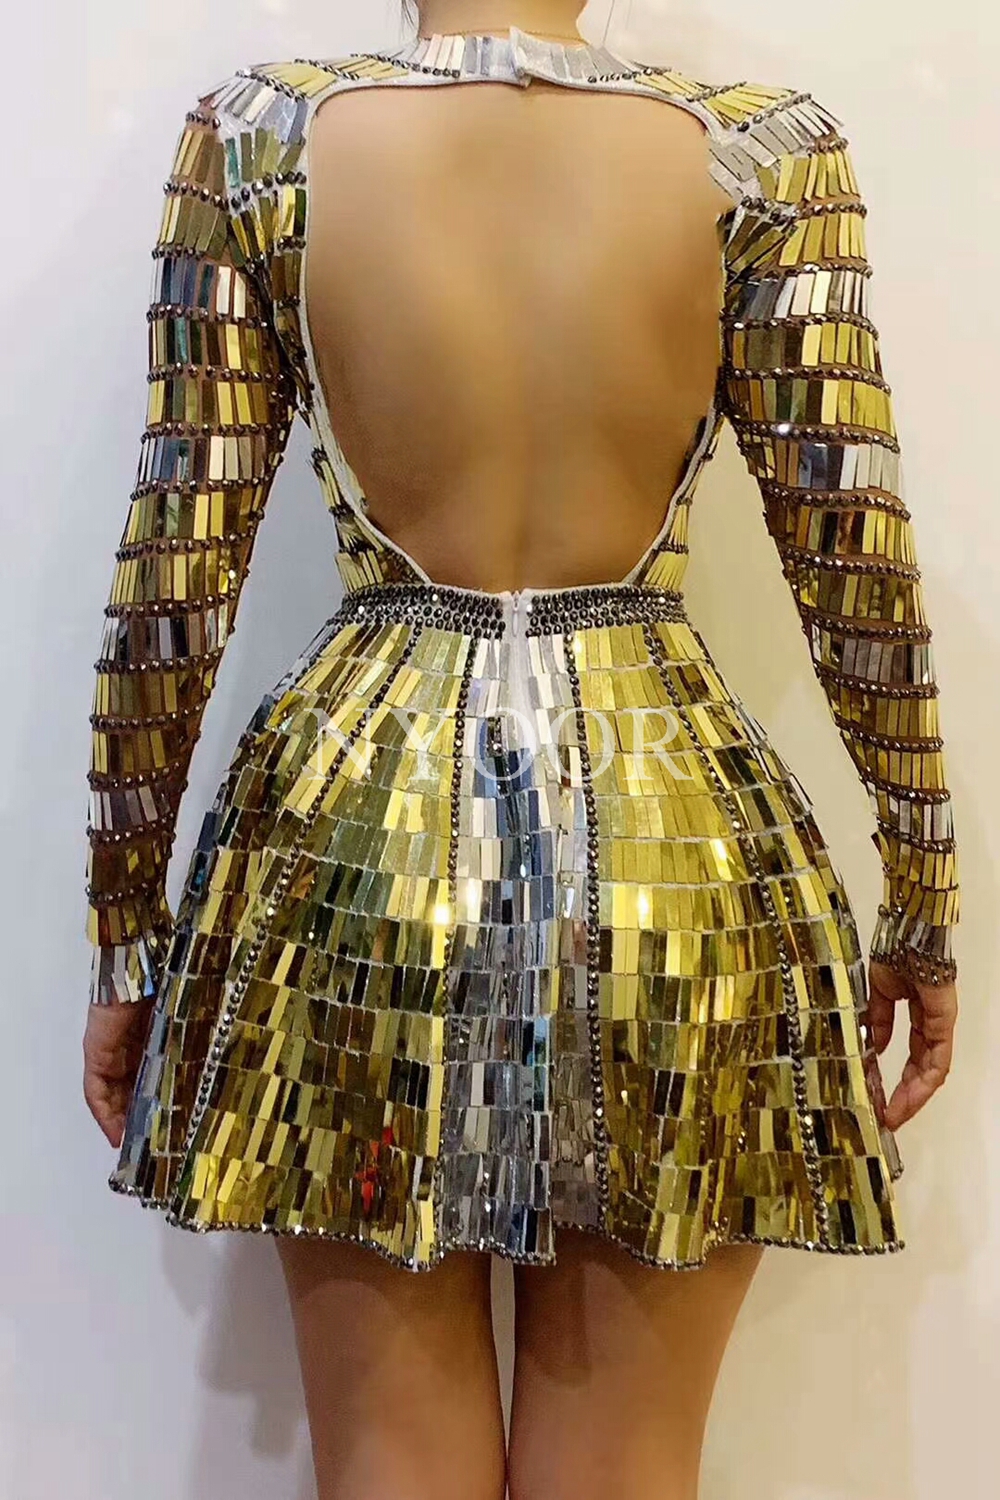 Shining Gold Silver Sequins Rhinestones Backless Dress DJ Singer Dancer Stage Wear Dance Team Mirrors Costume Party Show Clothes